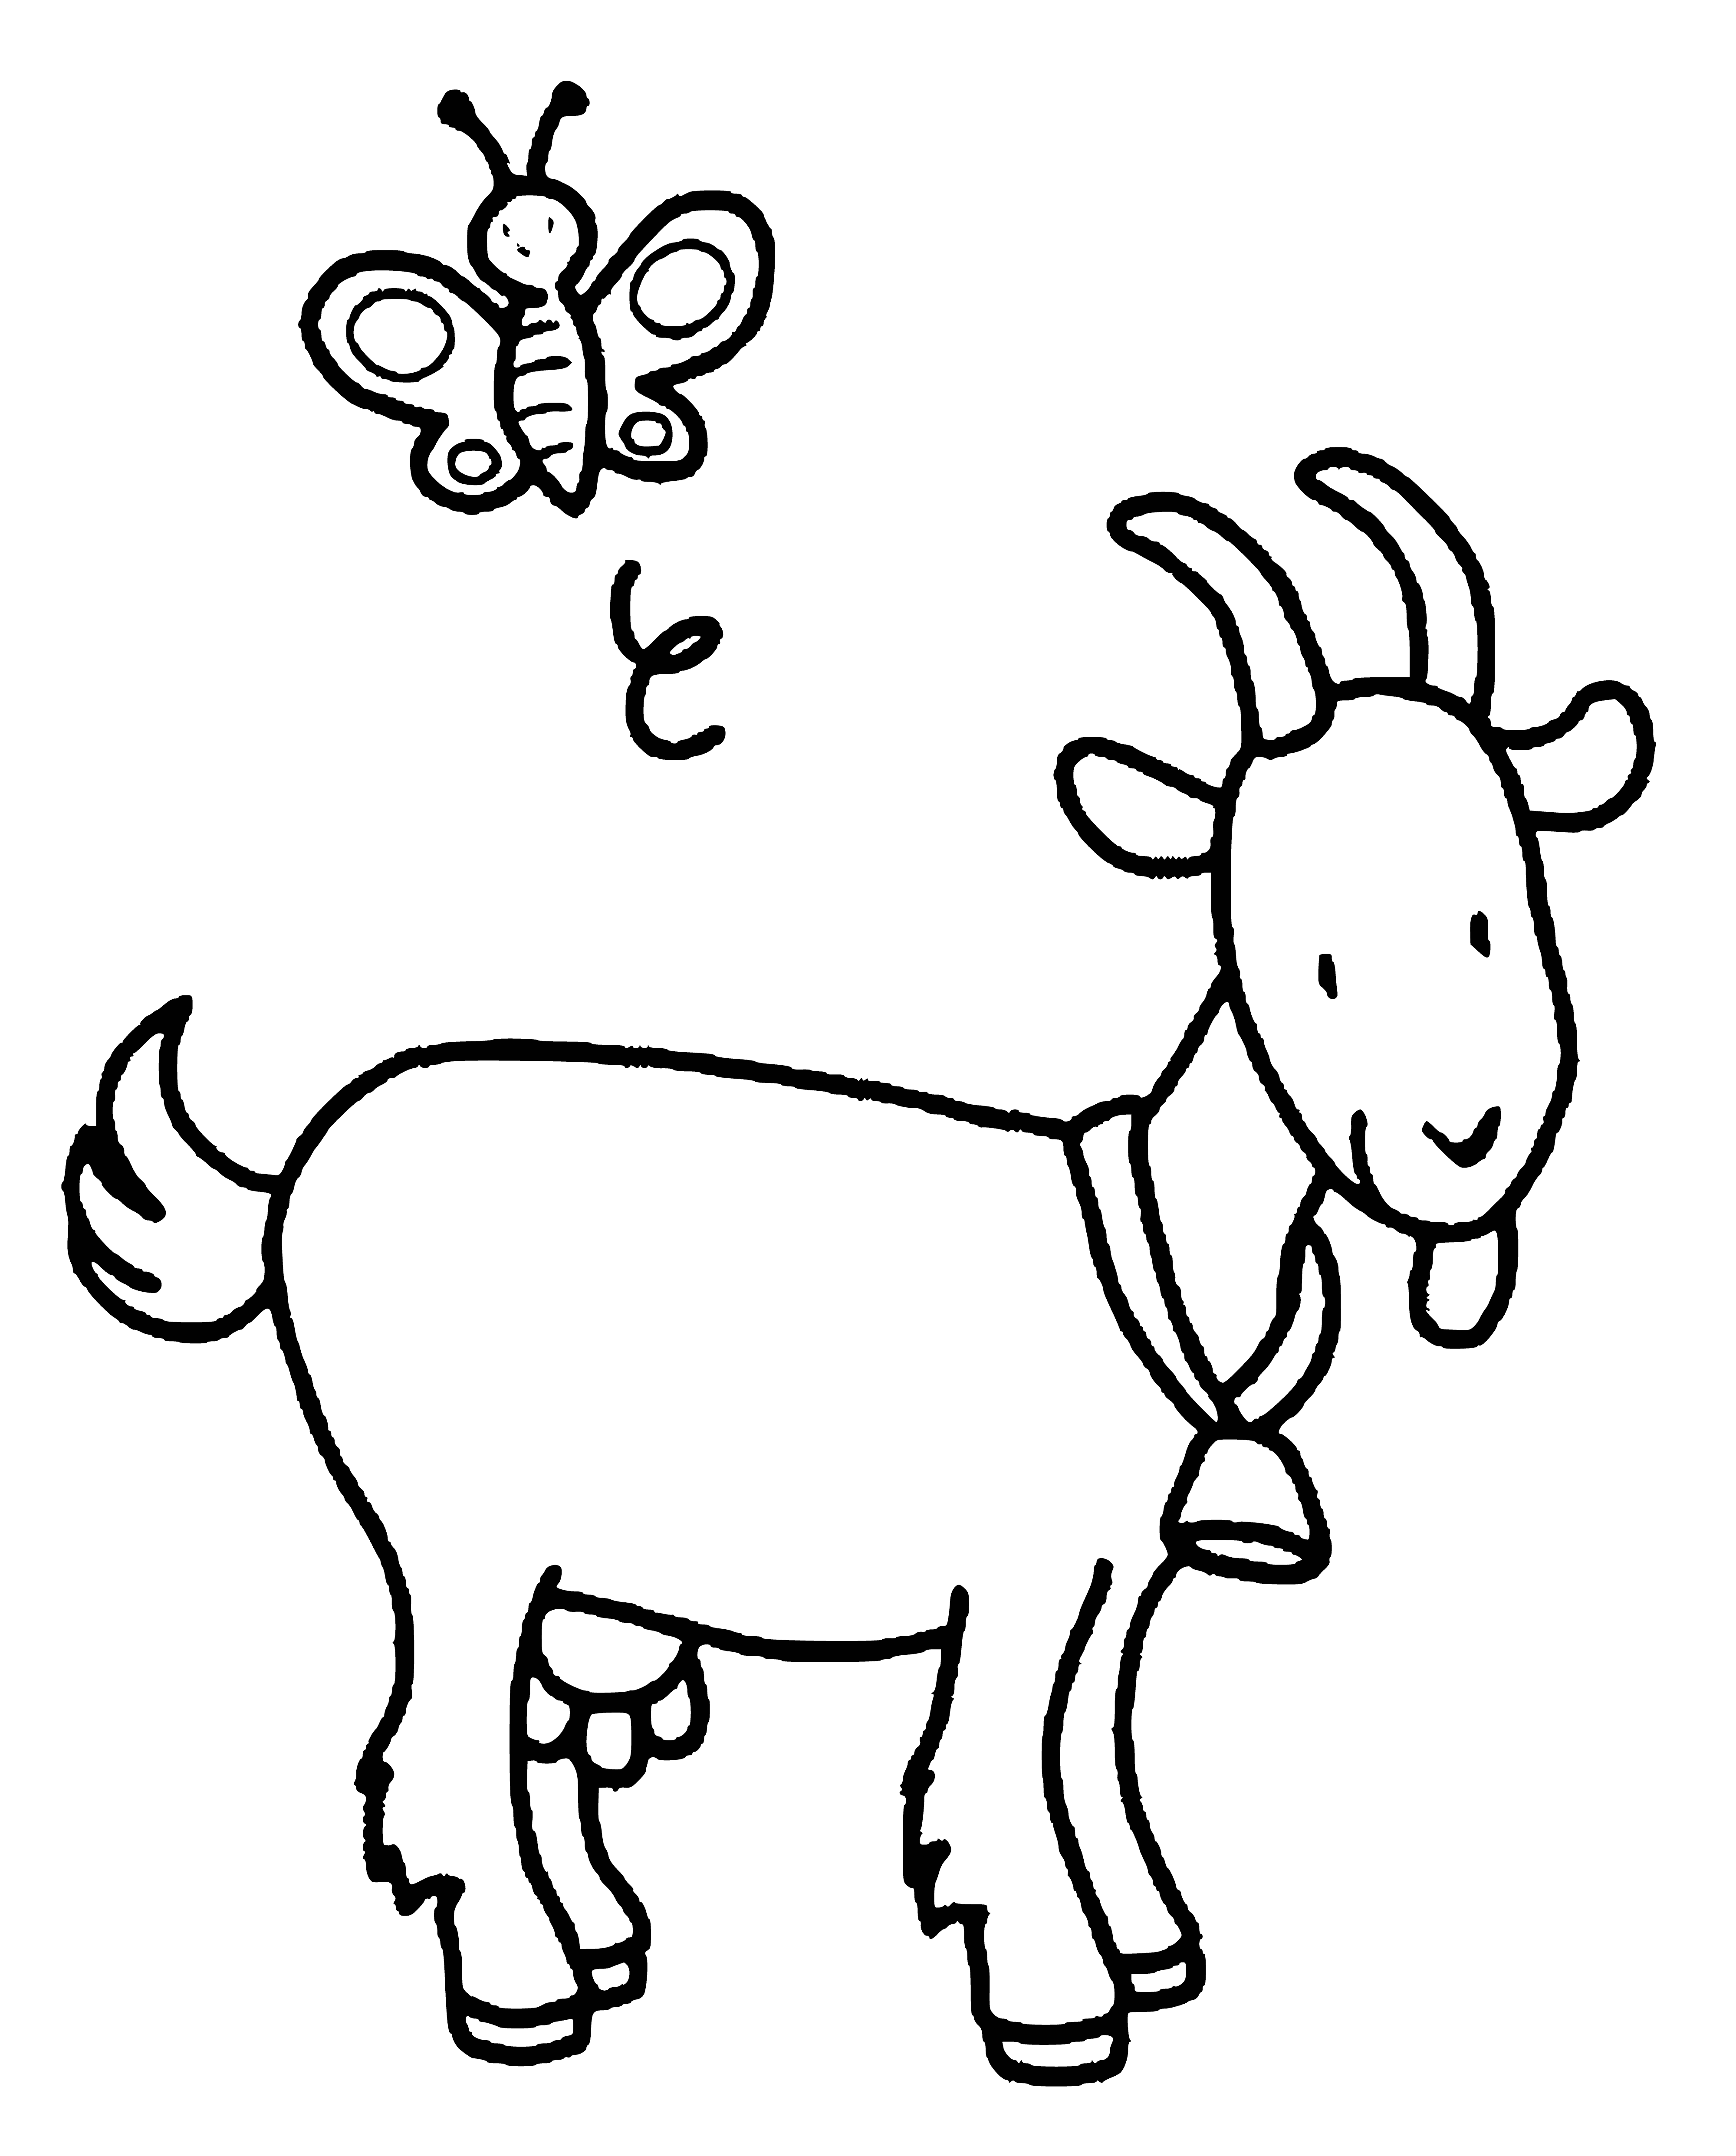 coloring page: Goat with bell around neck helps people keep track of it, or stops it from getting lost.